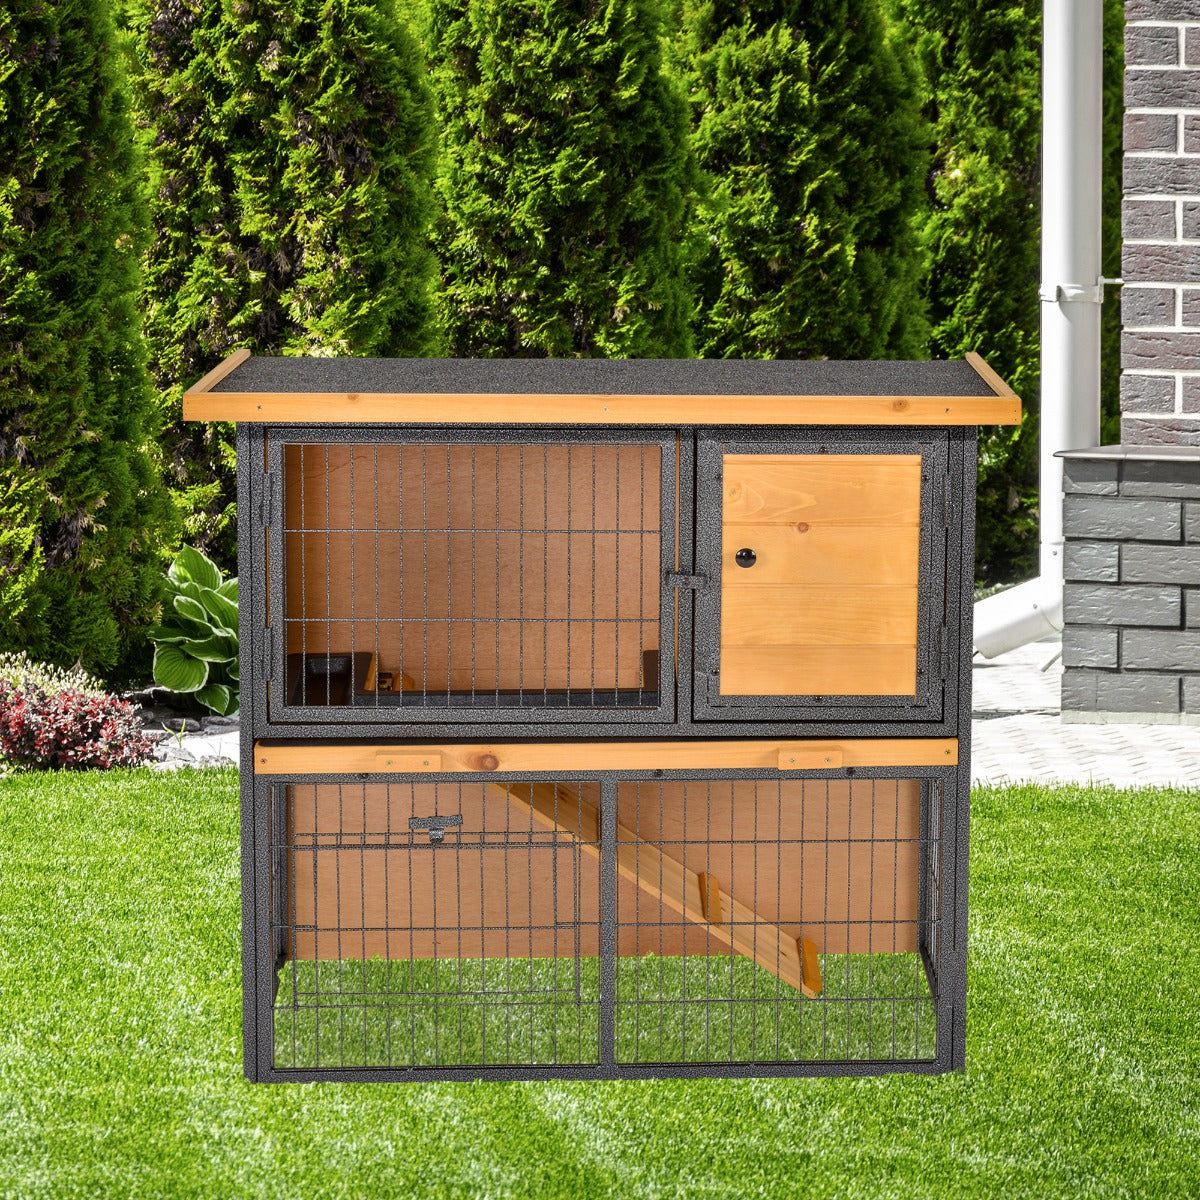 PawHut Wood-metal Rabbit Hutch Elevated Pet House Bunny Cage with Slide-Out Tray Asphalt Openable Roof Lockable Door Outdoor